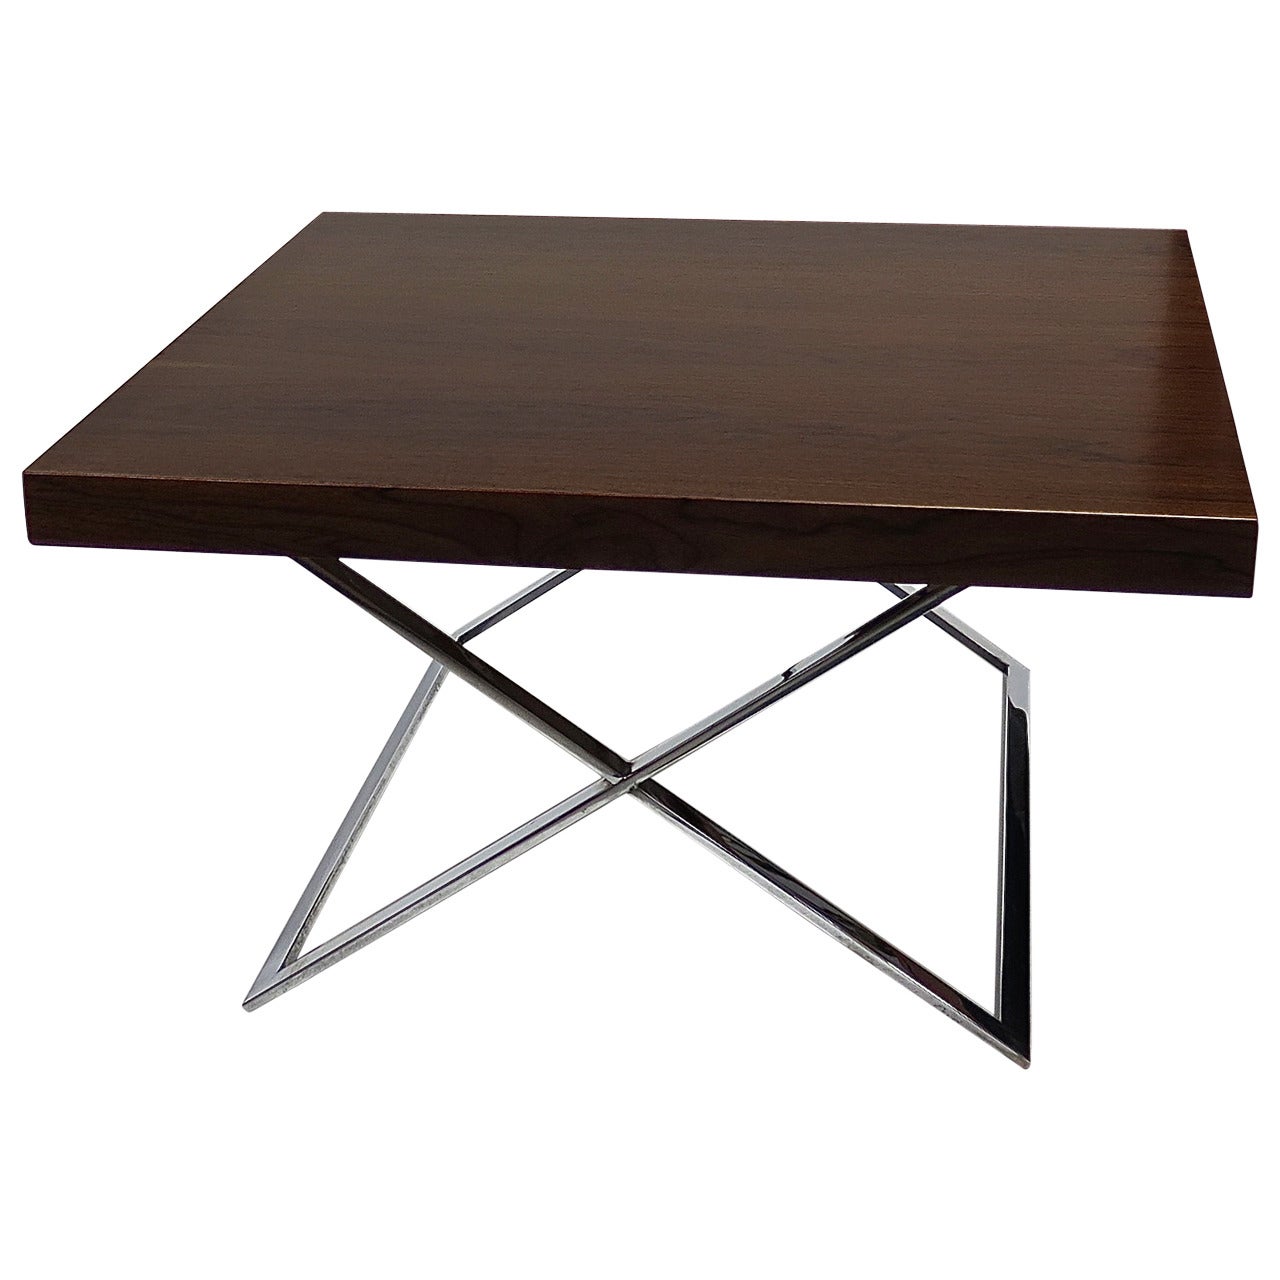 1960 Milo Baughman for Rougier Low Table or Stand